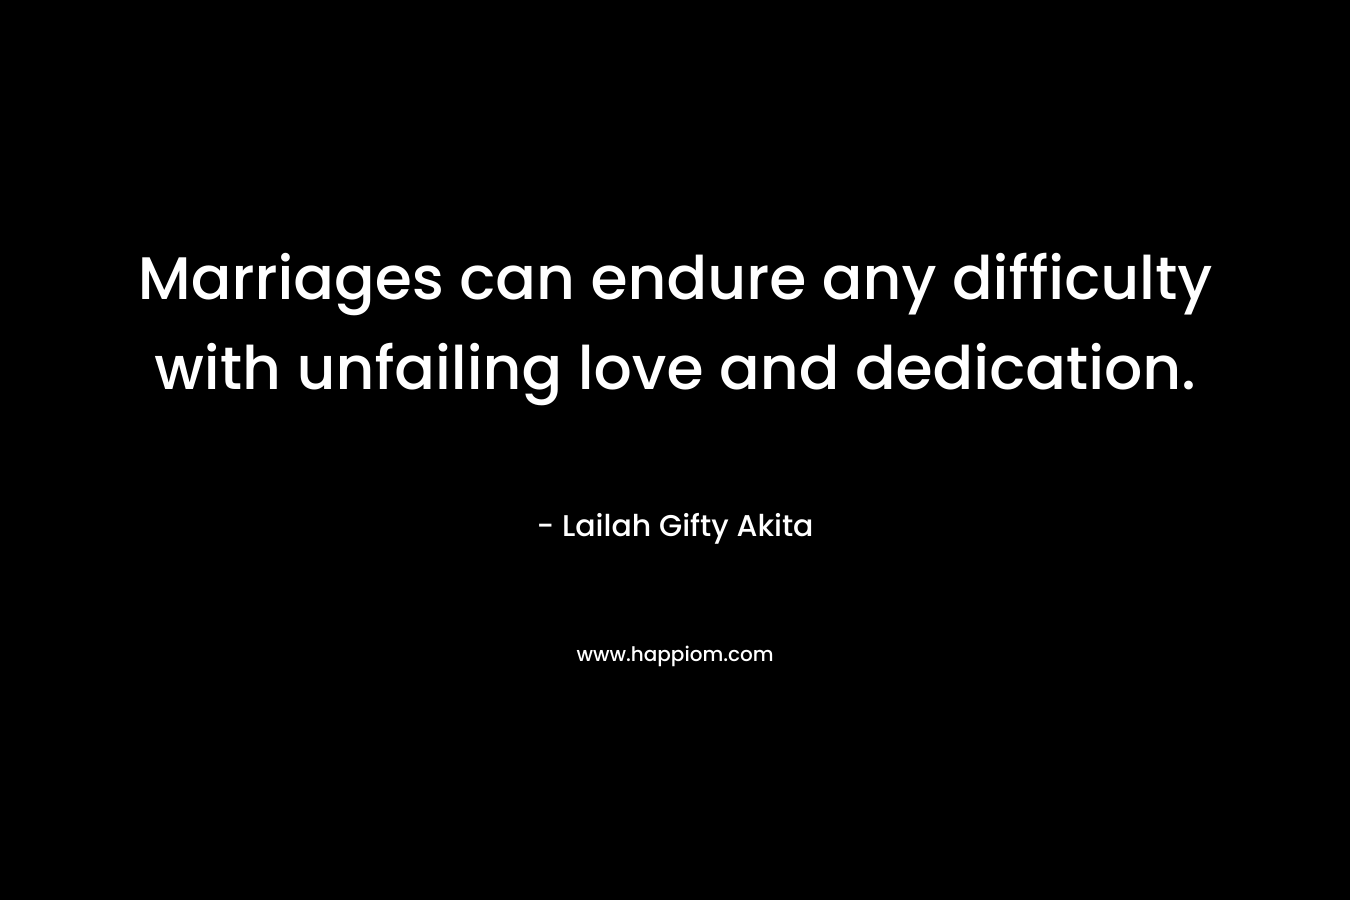 Marriages can endure any difficulty with unfailing love and dedication. – Lailah Gifty Akita